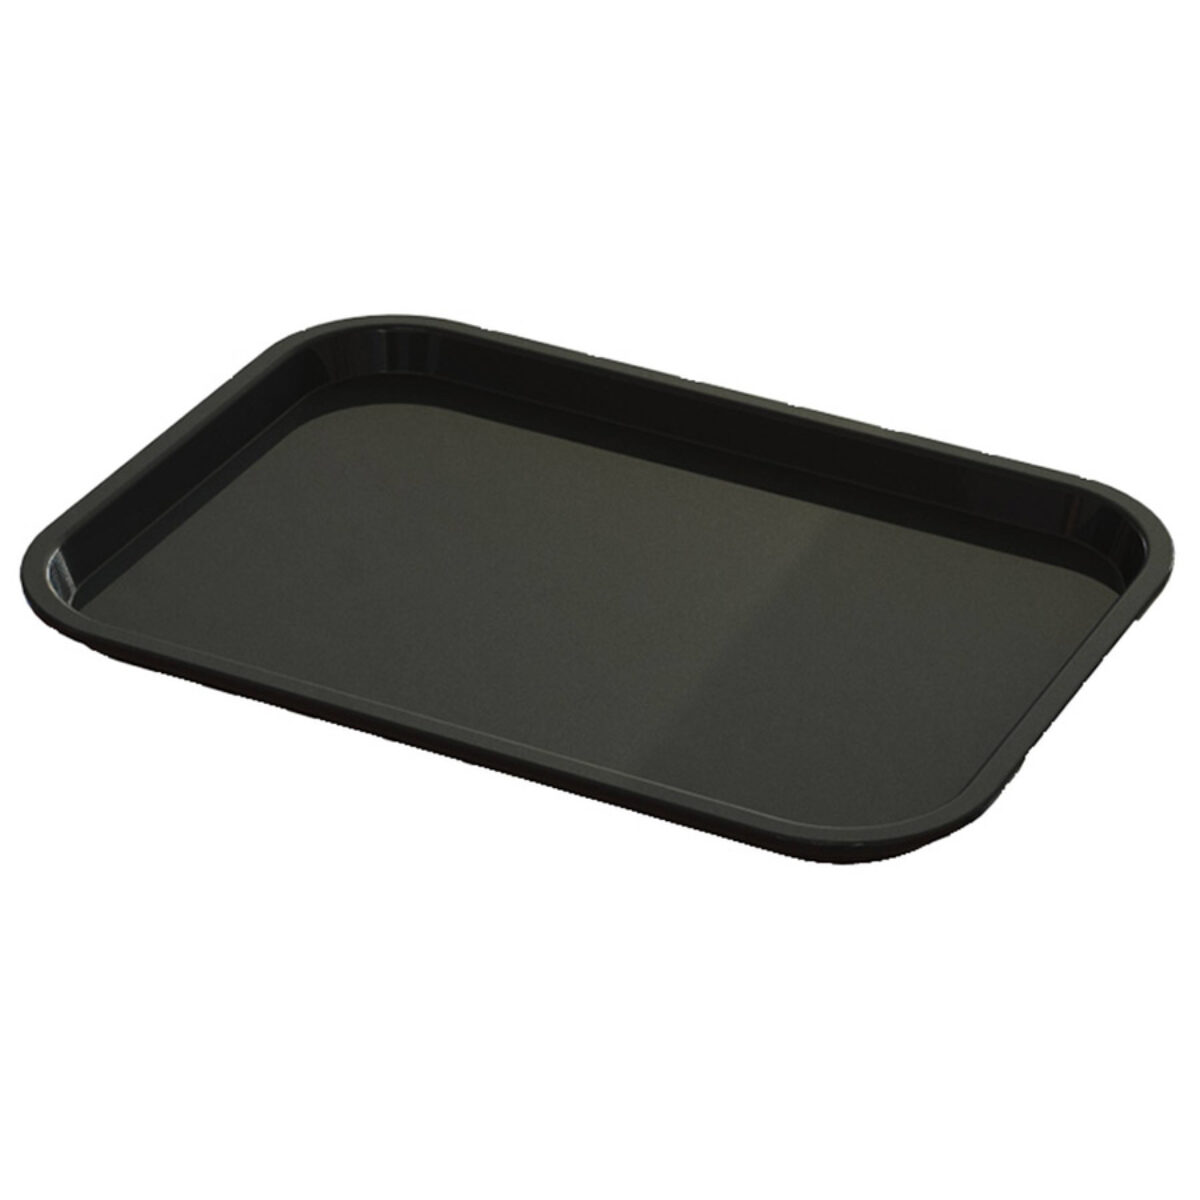 Serving Trays 24395 Brown Plastic Fast Food Tray, 12 By 16-Inch, (Set Of 6)